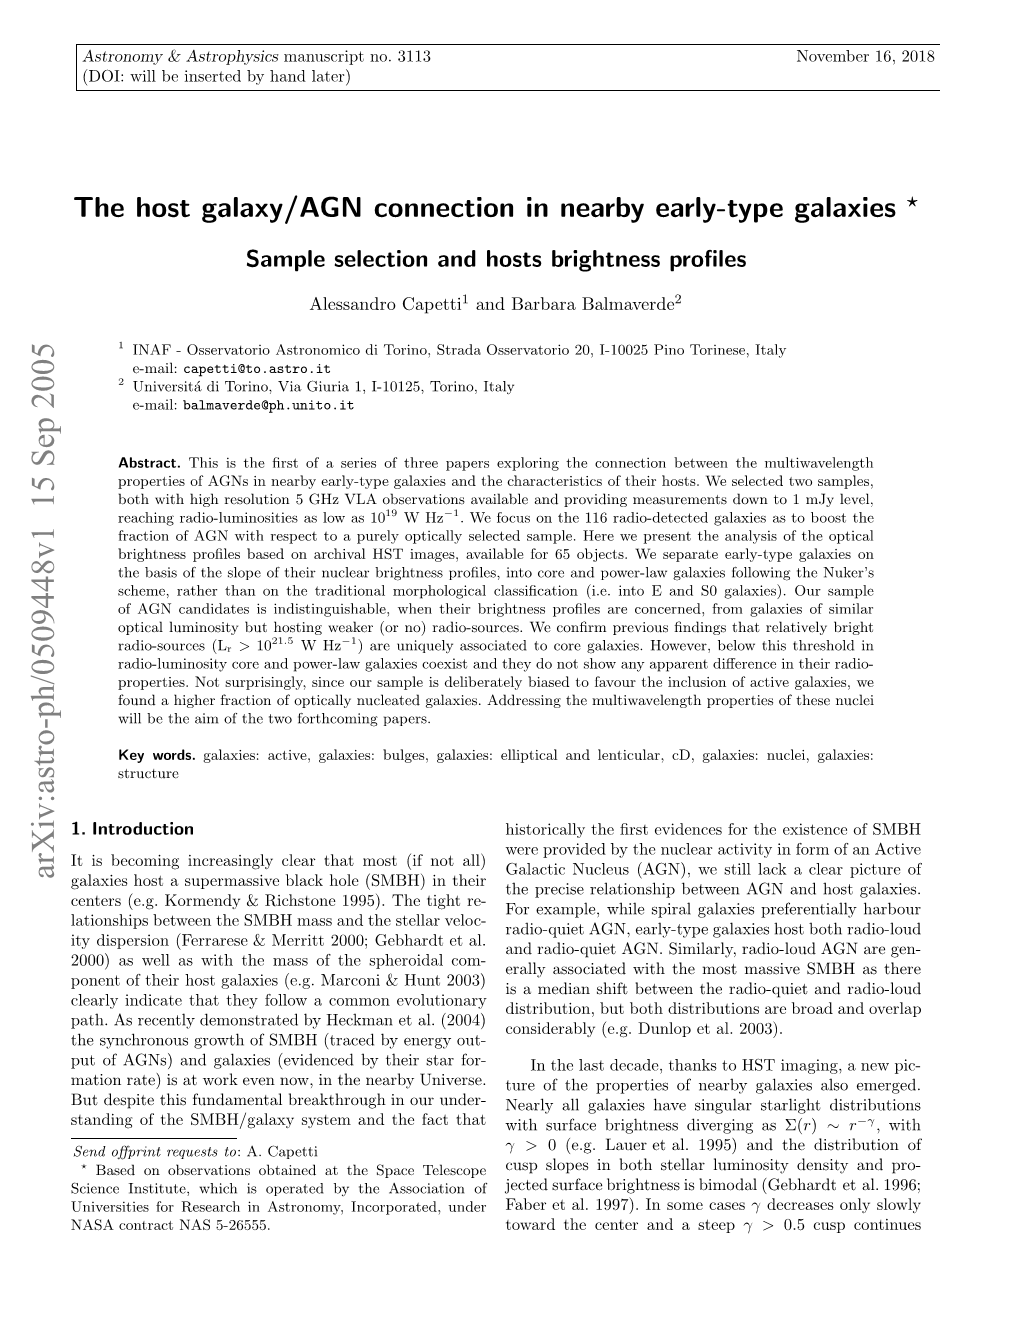 The Host Galaxy/AGN Connection in Nearby Early-Type Galaxies